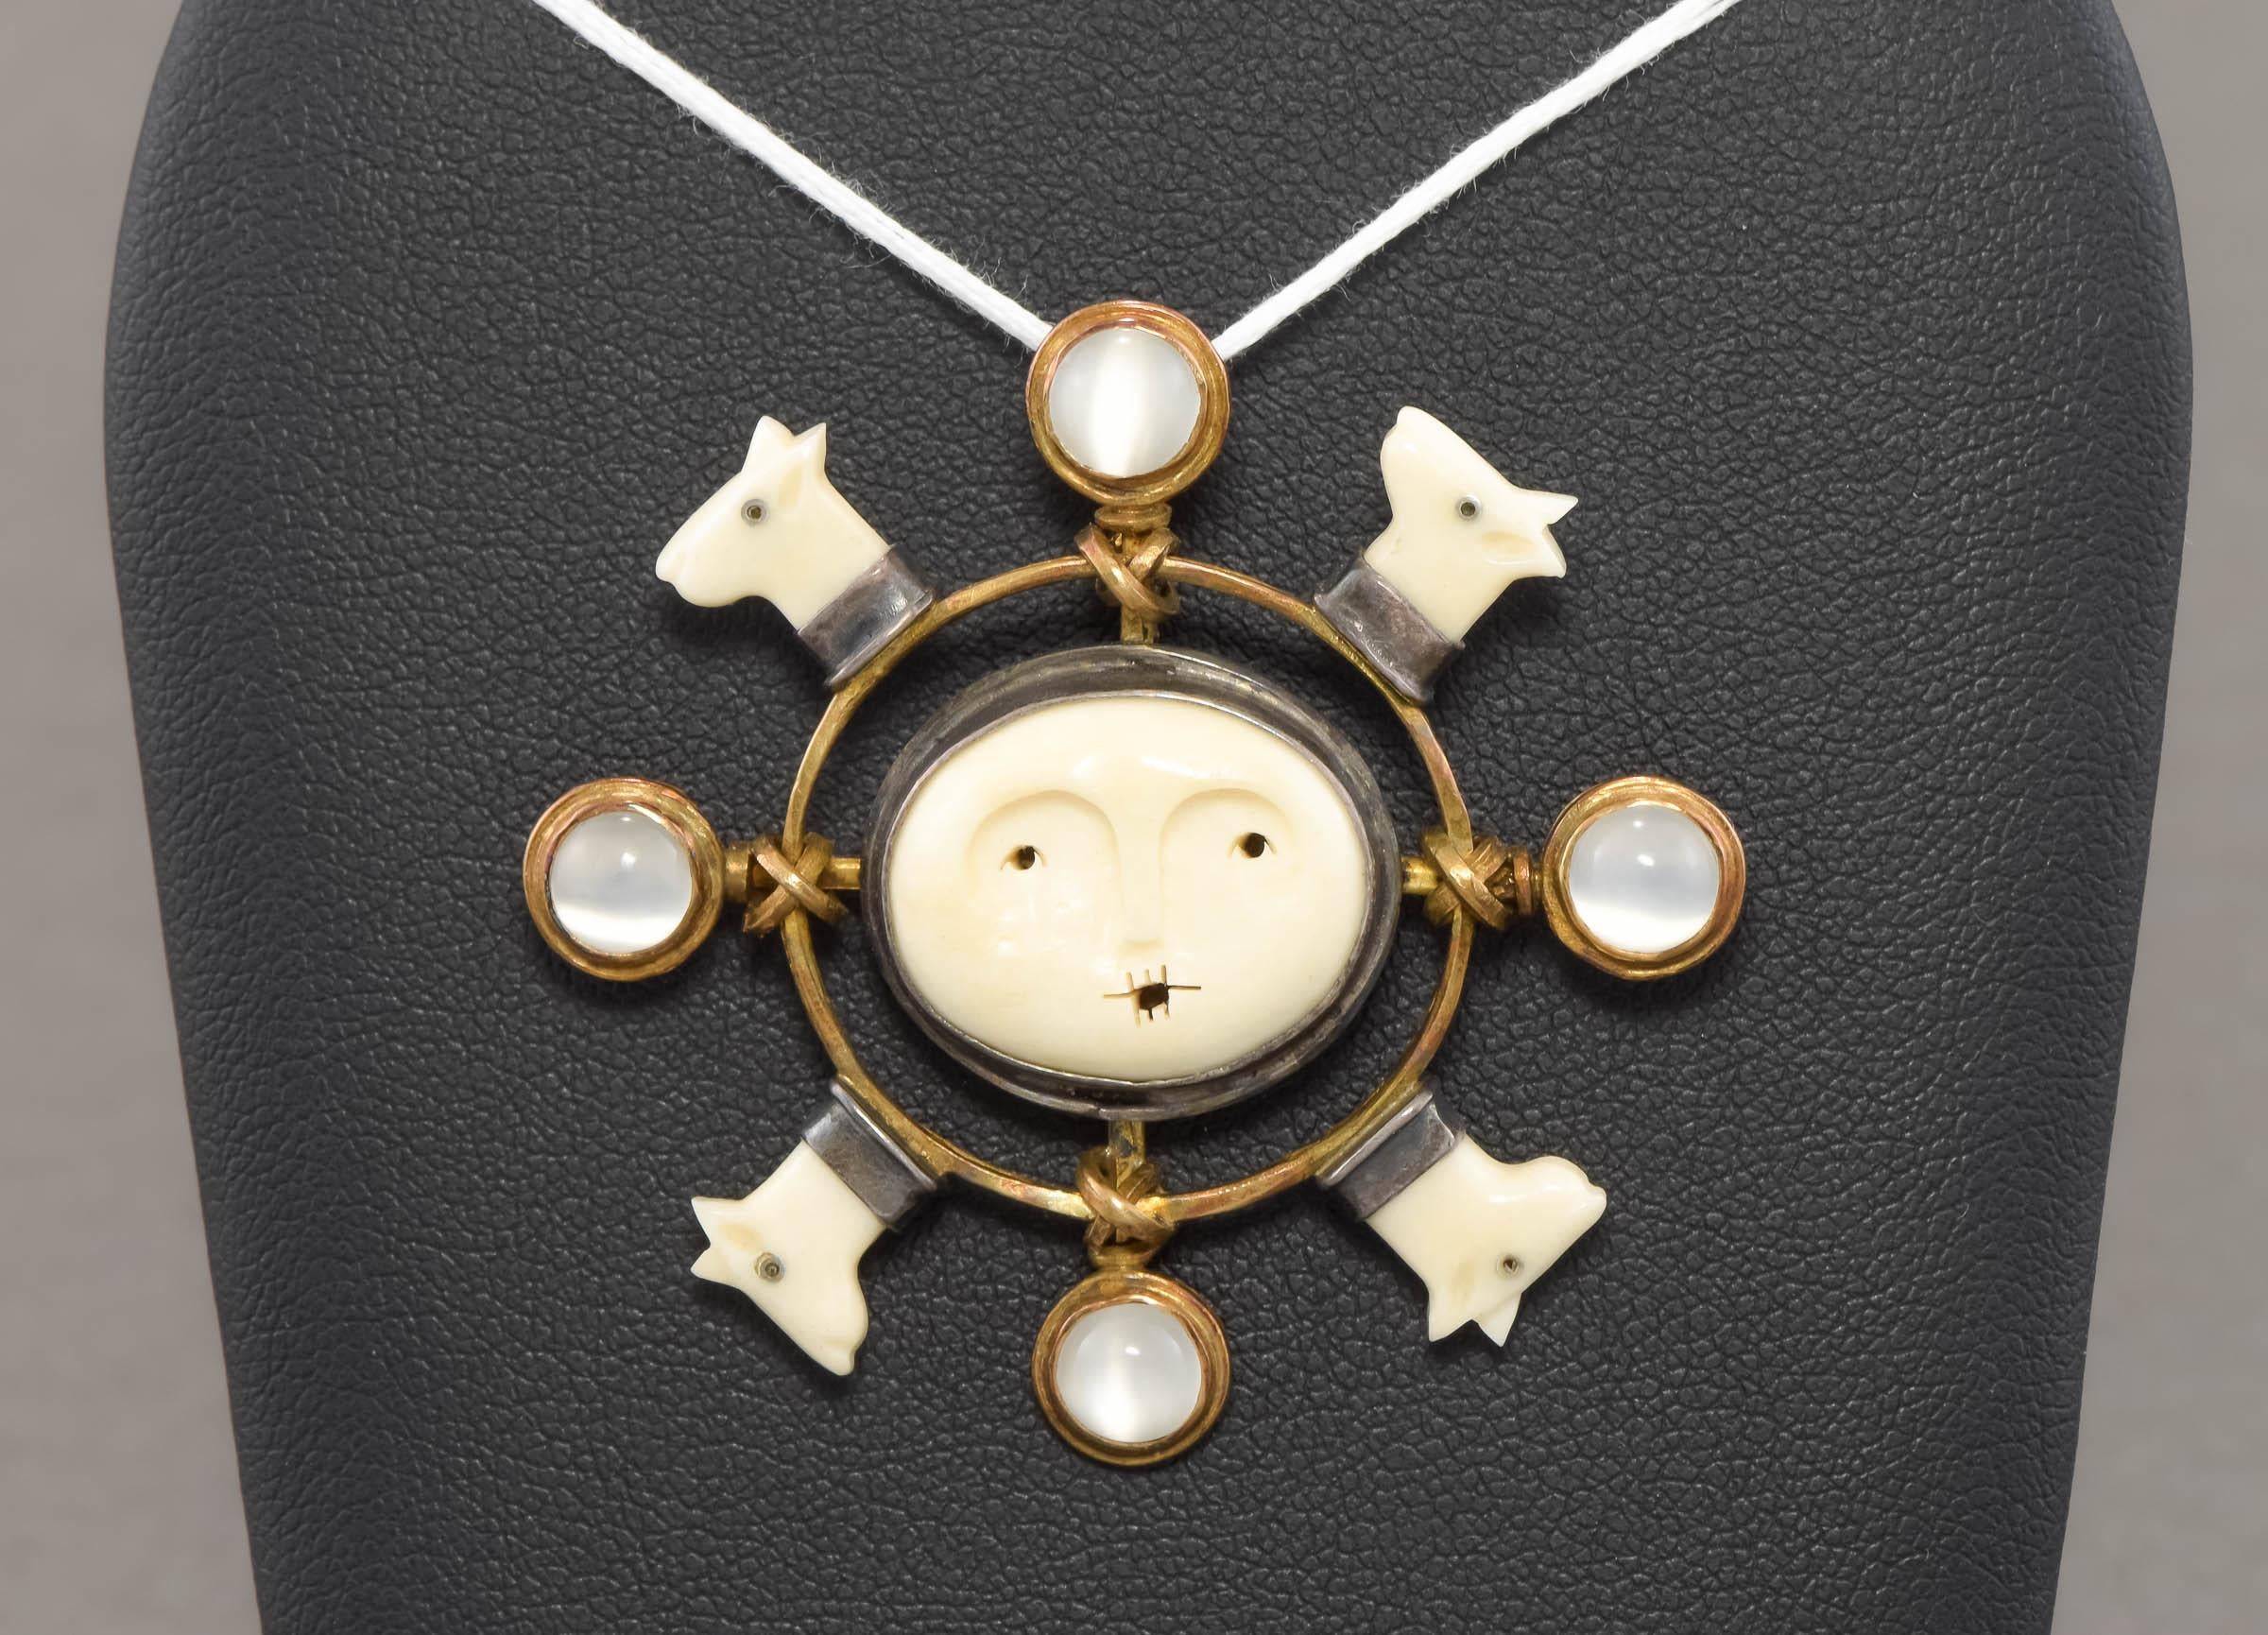 I'm delighted to offer this very special pendant by the talented & well-known American jewelry artist Carolyn Morris Bach.  Dating to 1997 (signed and dated on the reverse of the piece), the pendant is sizable and so striking, with many of Carolyn's